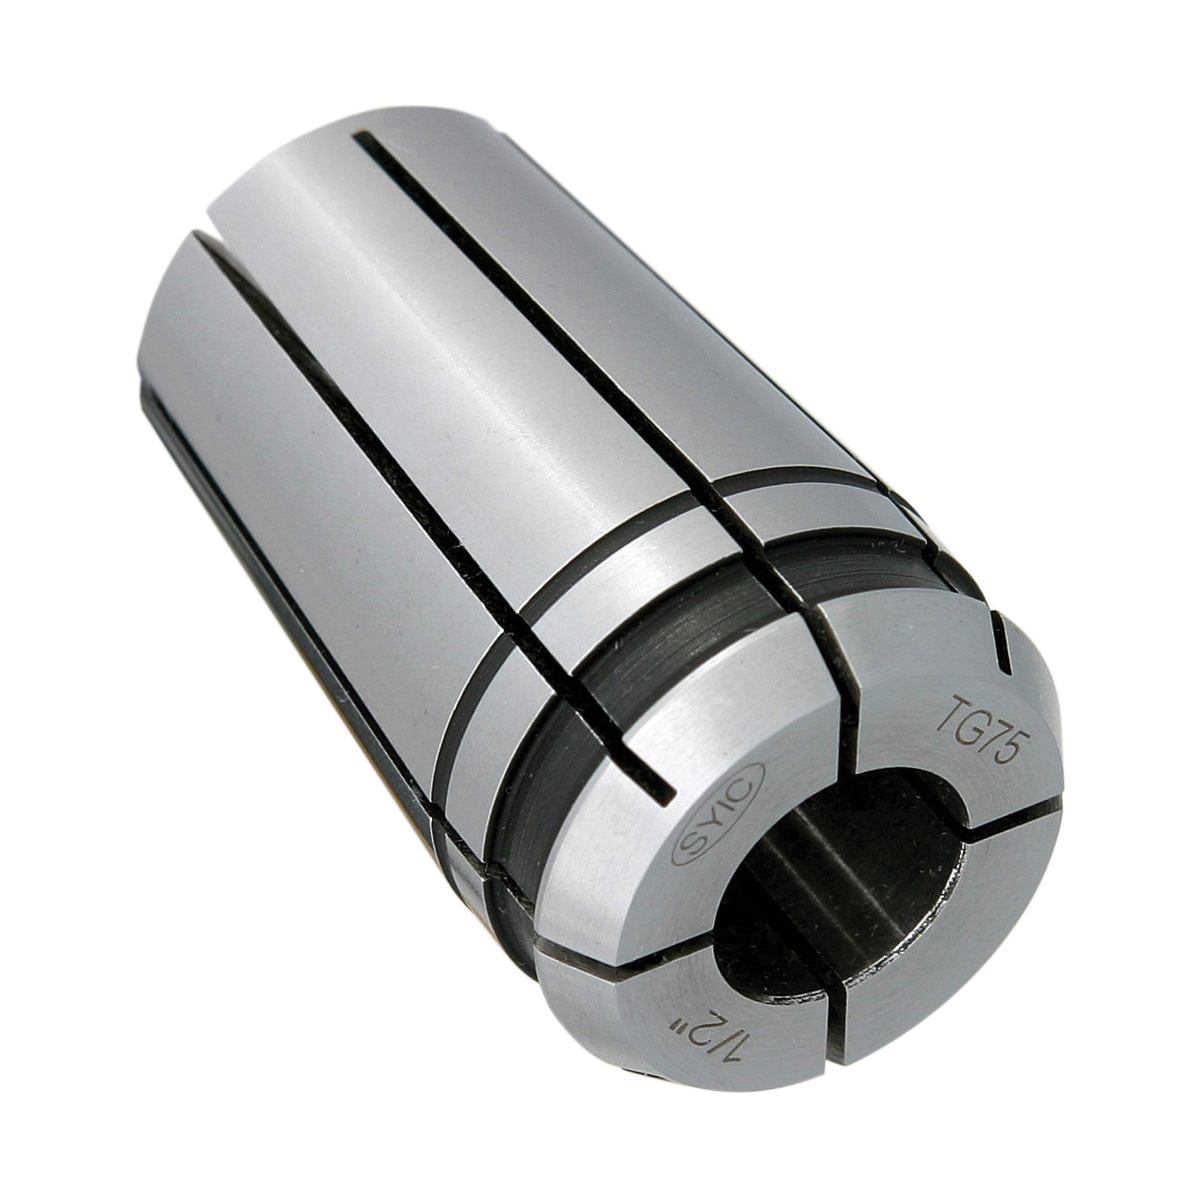 TG75 3/16" COLLET